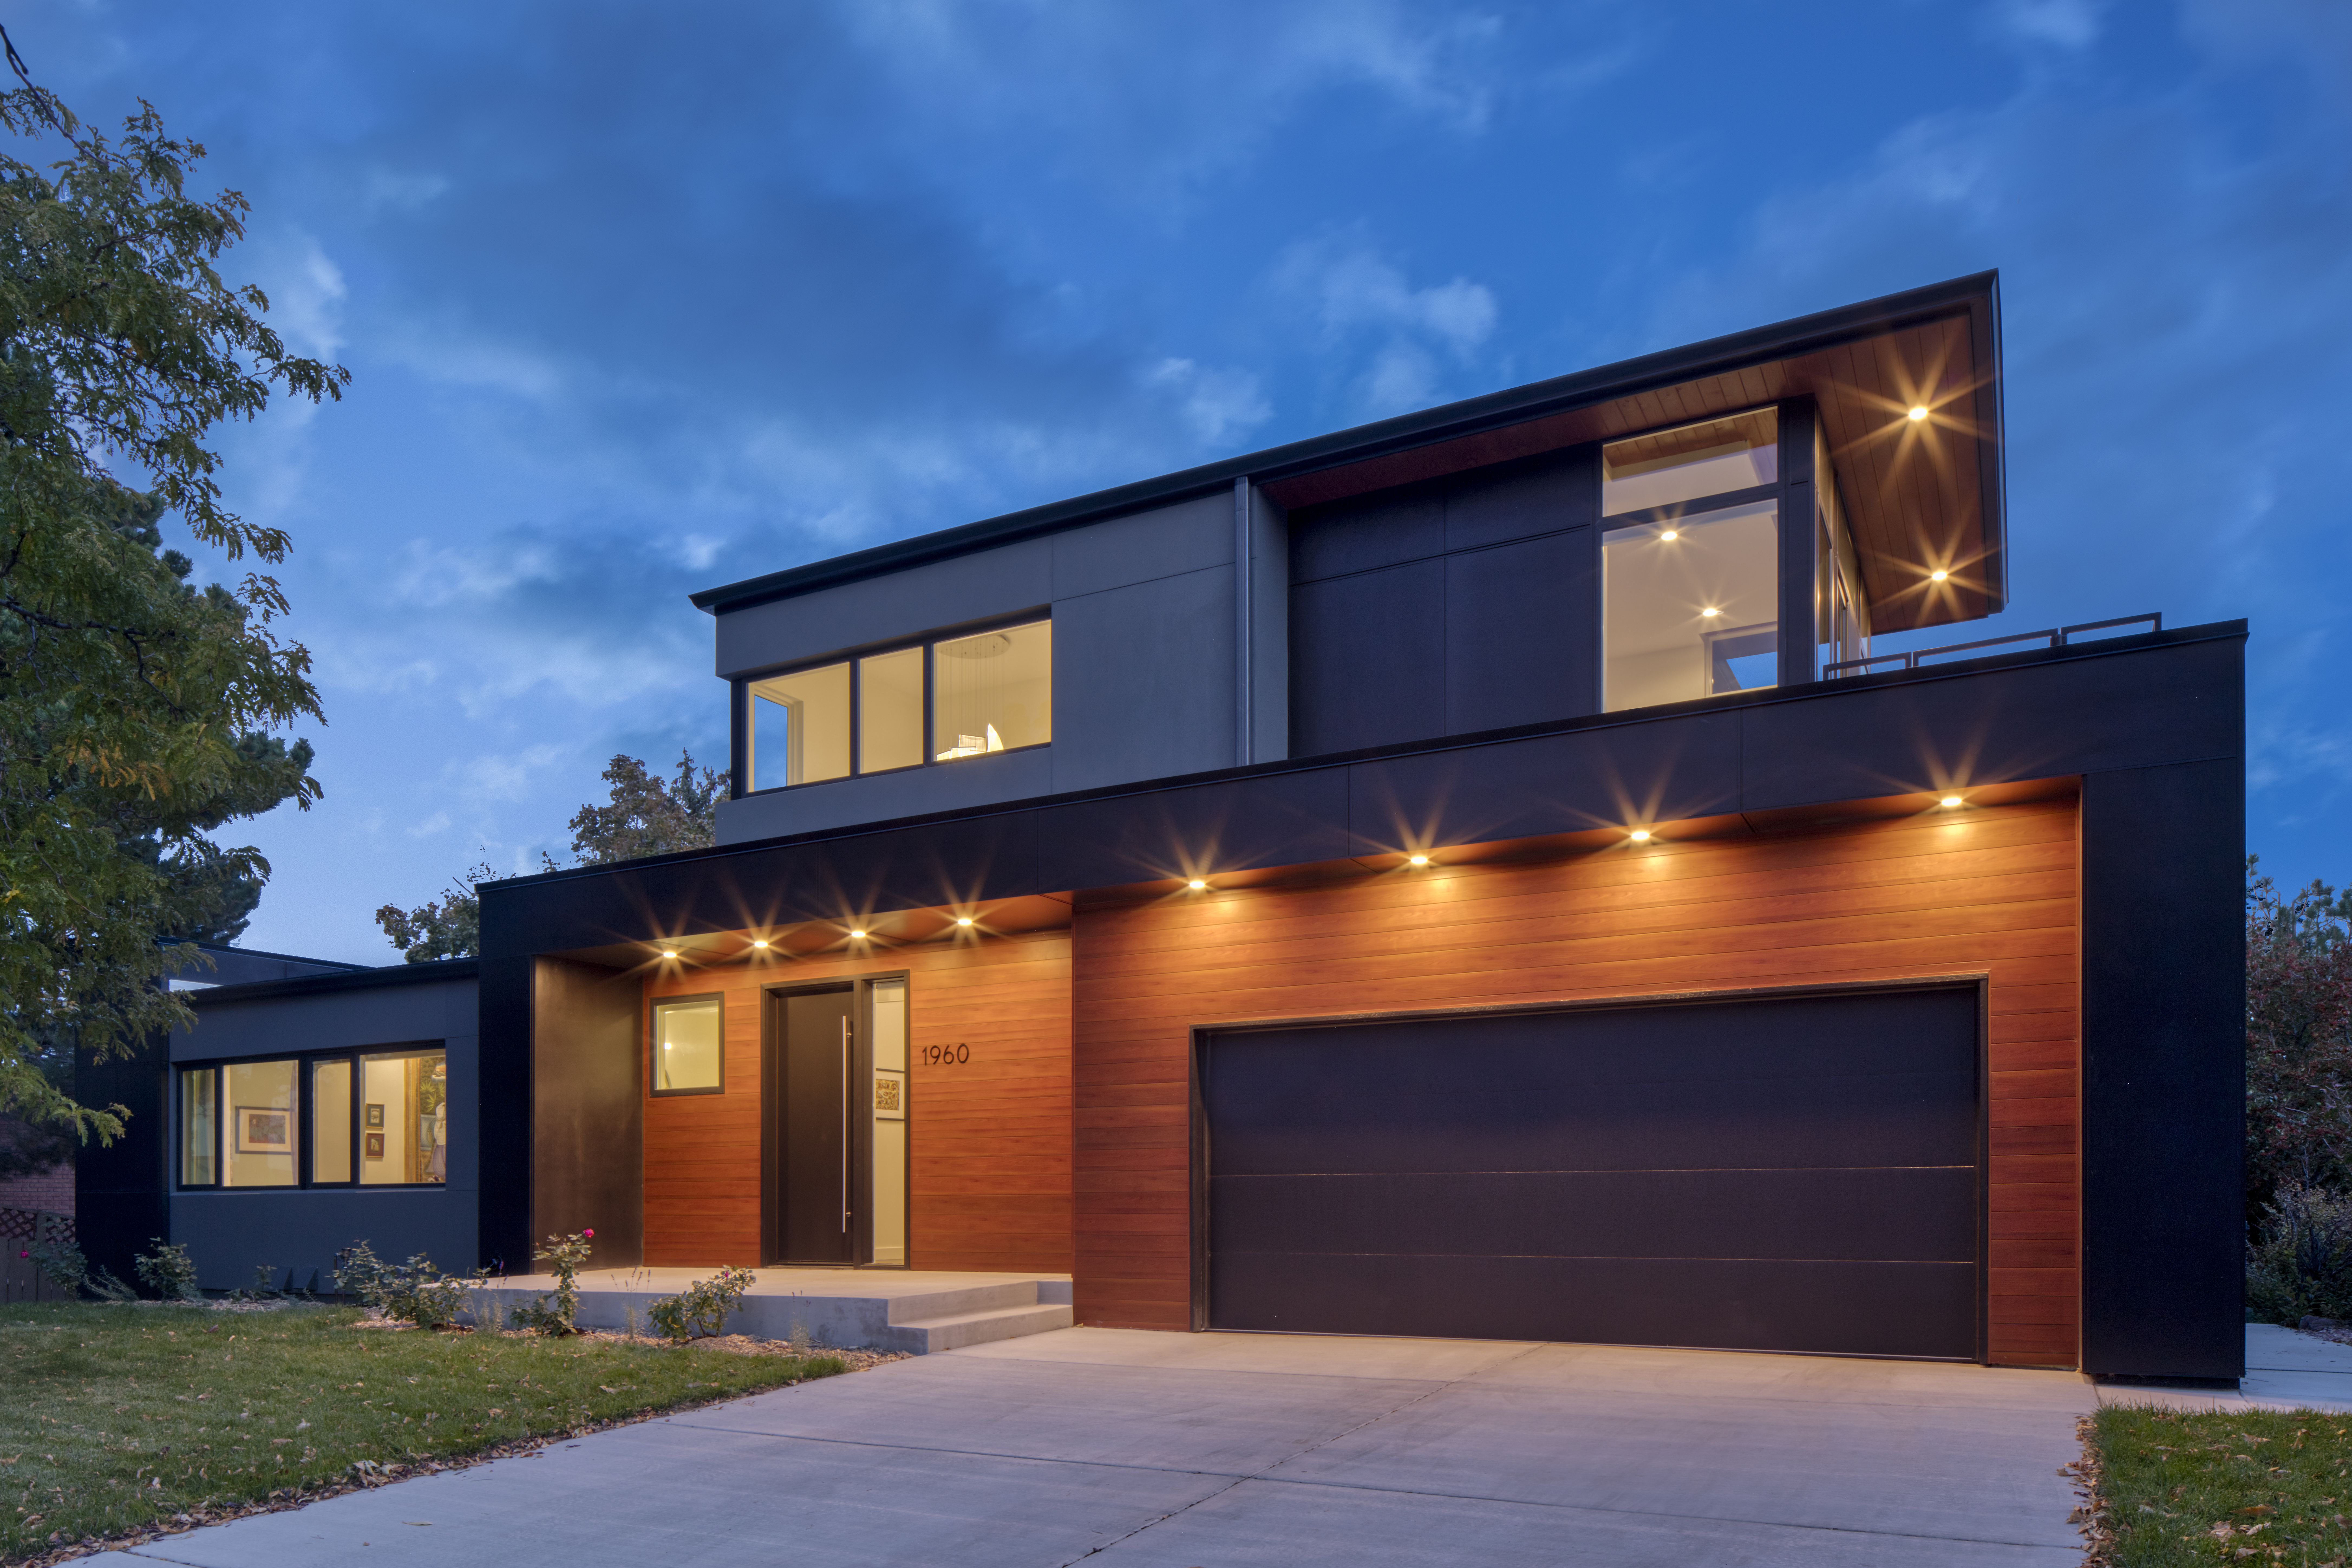 Evening view of a modern two-story Petra Custom Builders home with illuminated exterior sconces and a warm wooden garage door